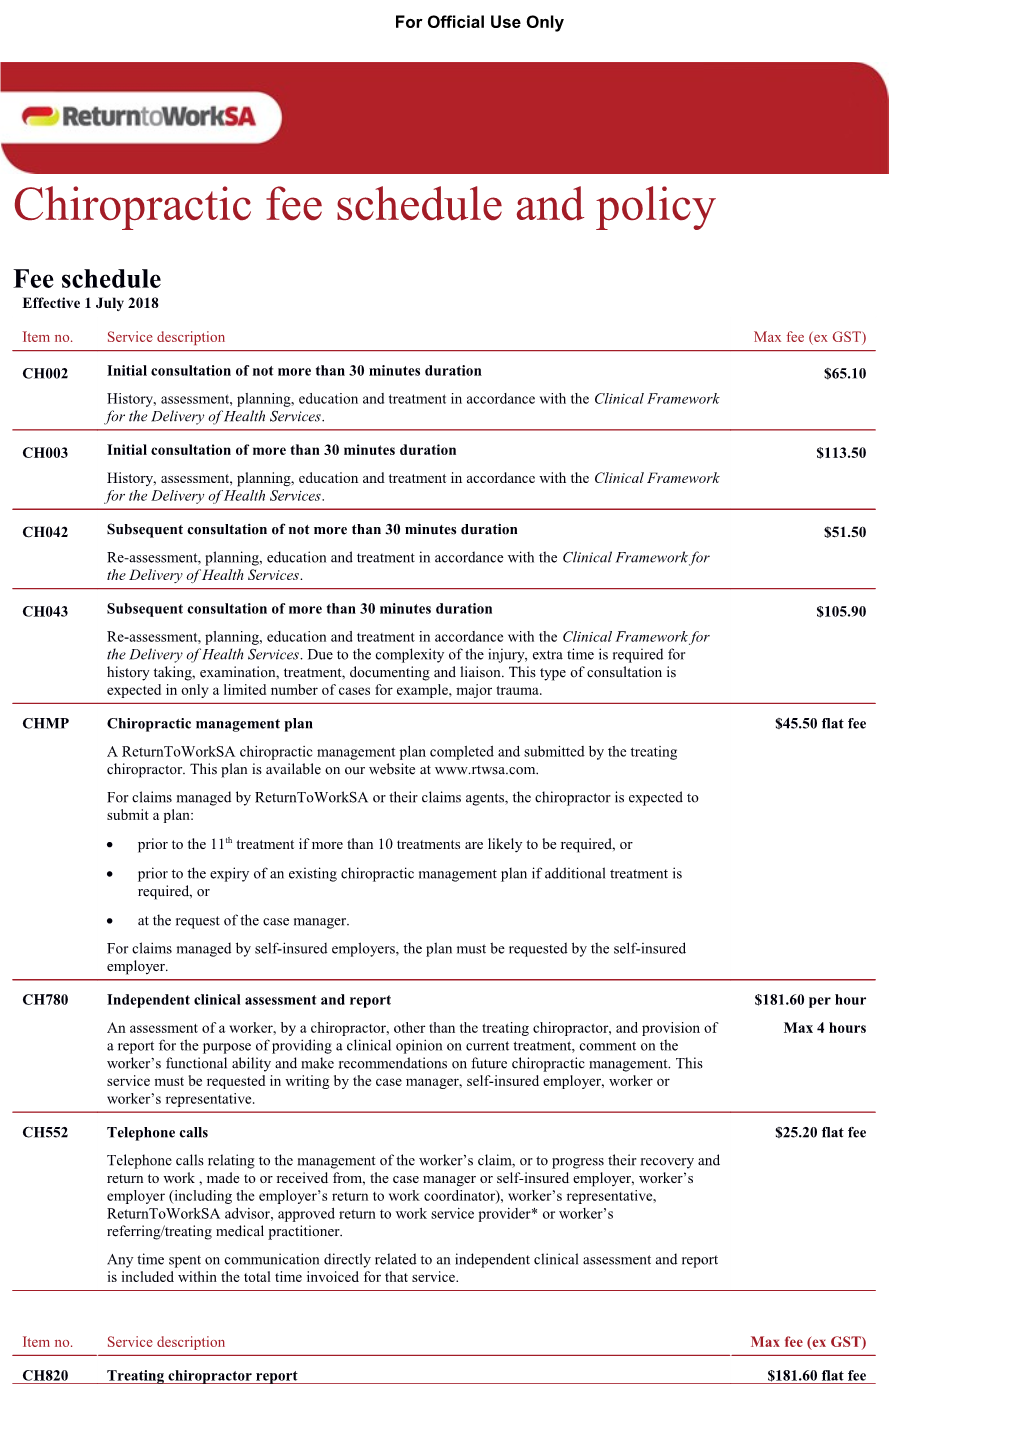 Chiropractic Fee Schedule and Policy